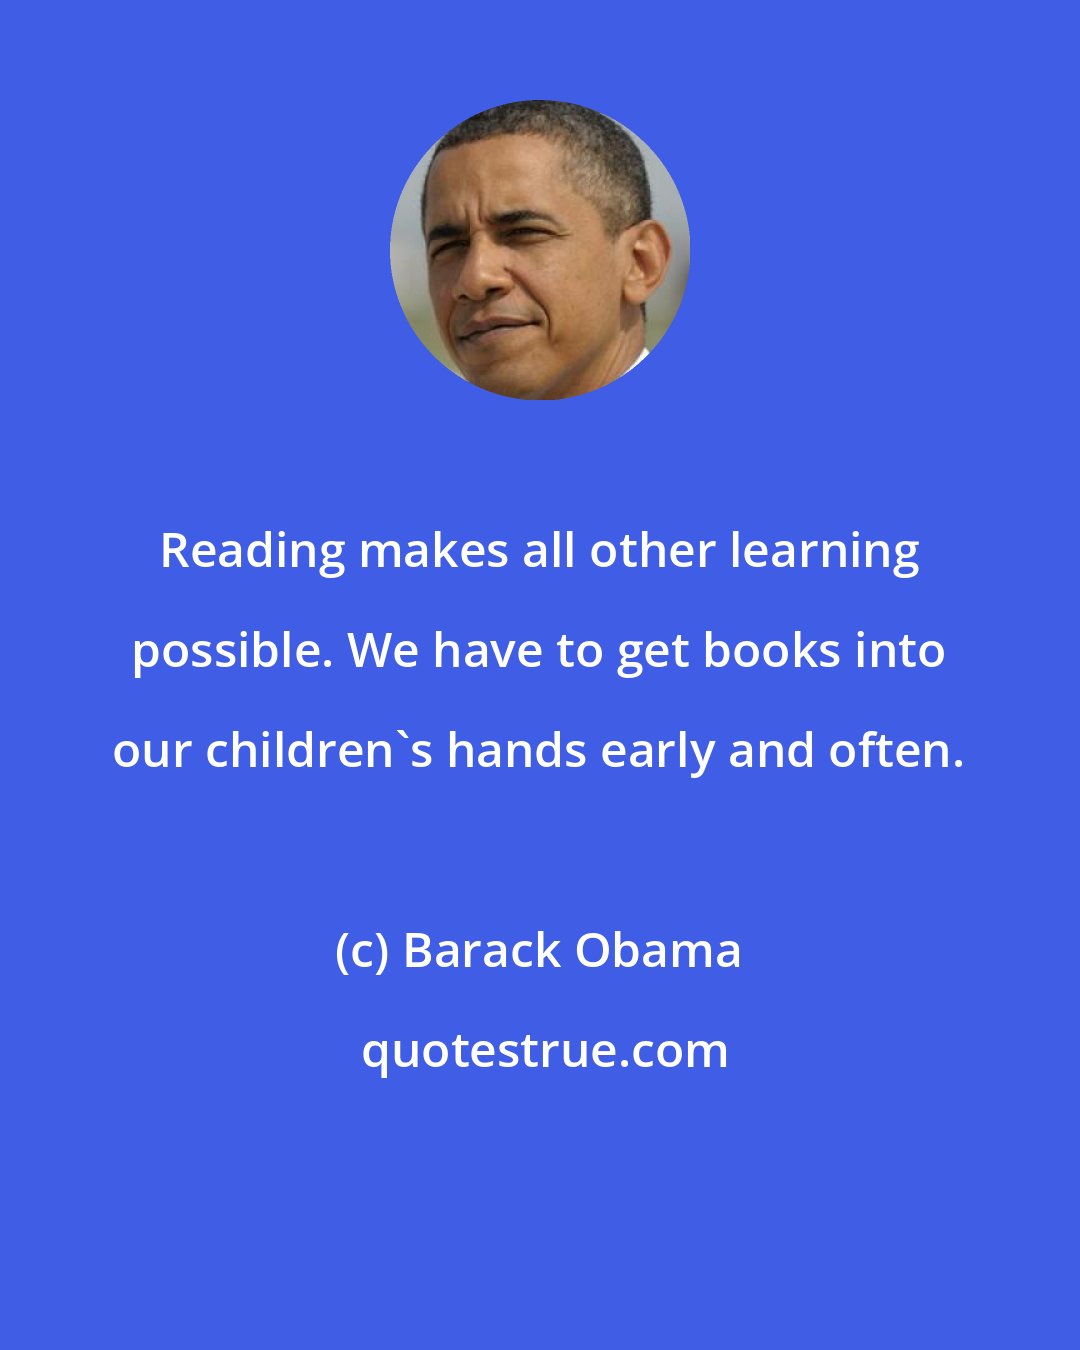 Barack Obama: Reading makes all other learning possible. We have to get books into our children's hands early and often.